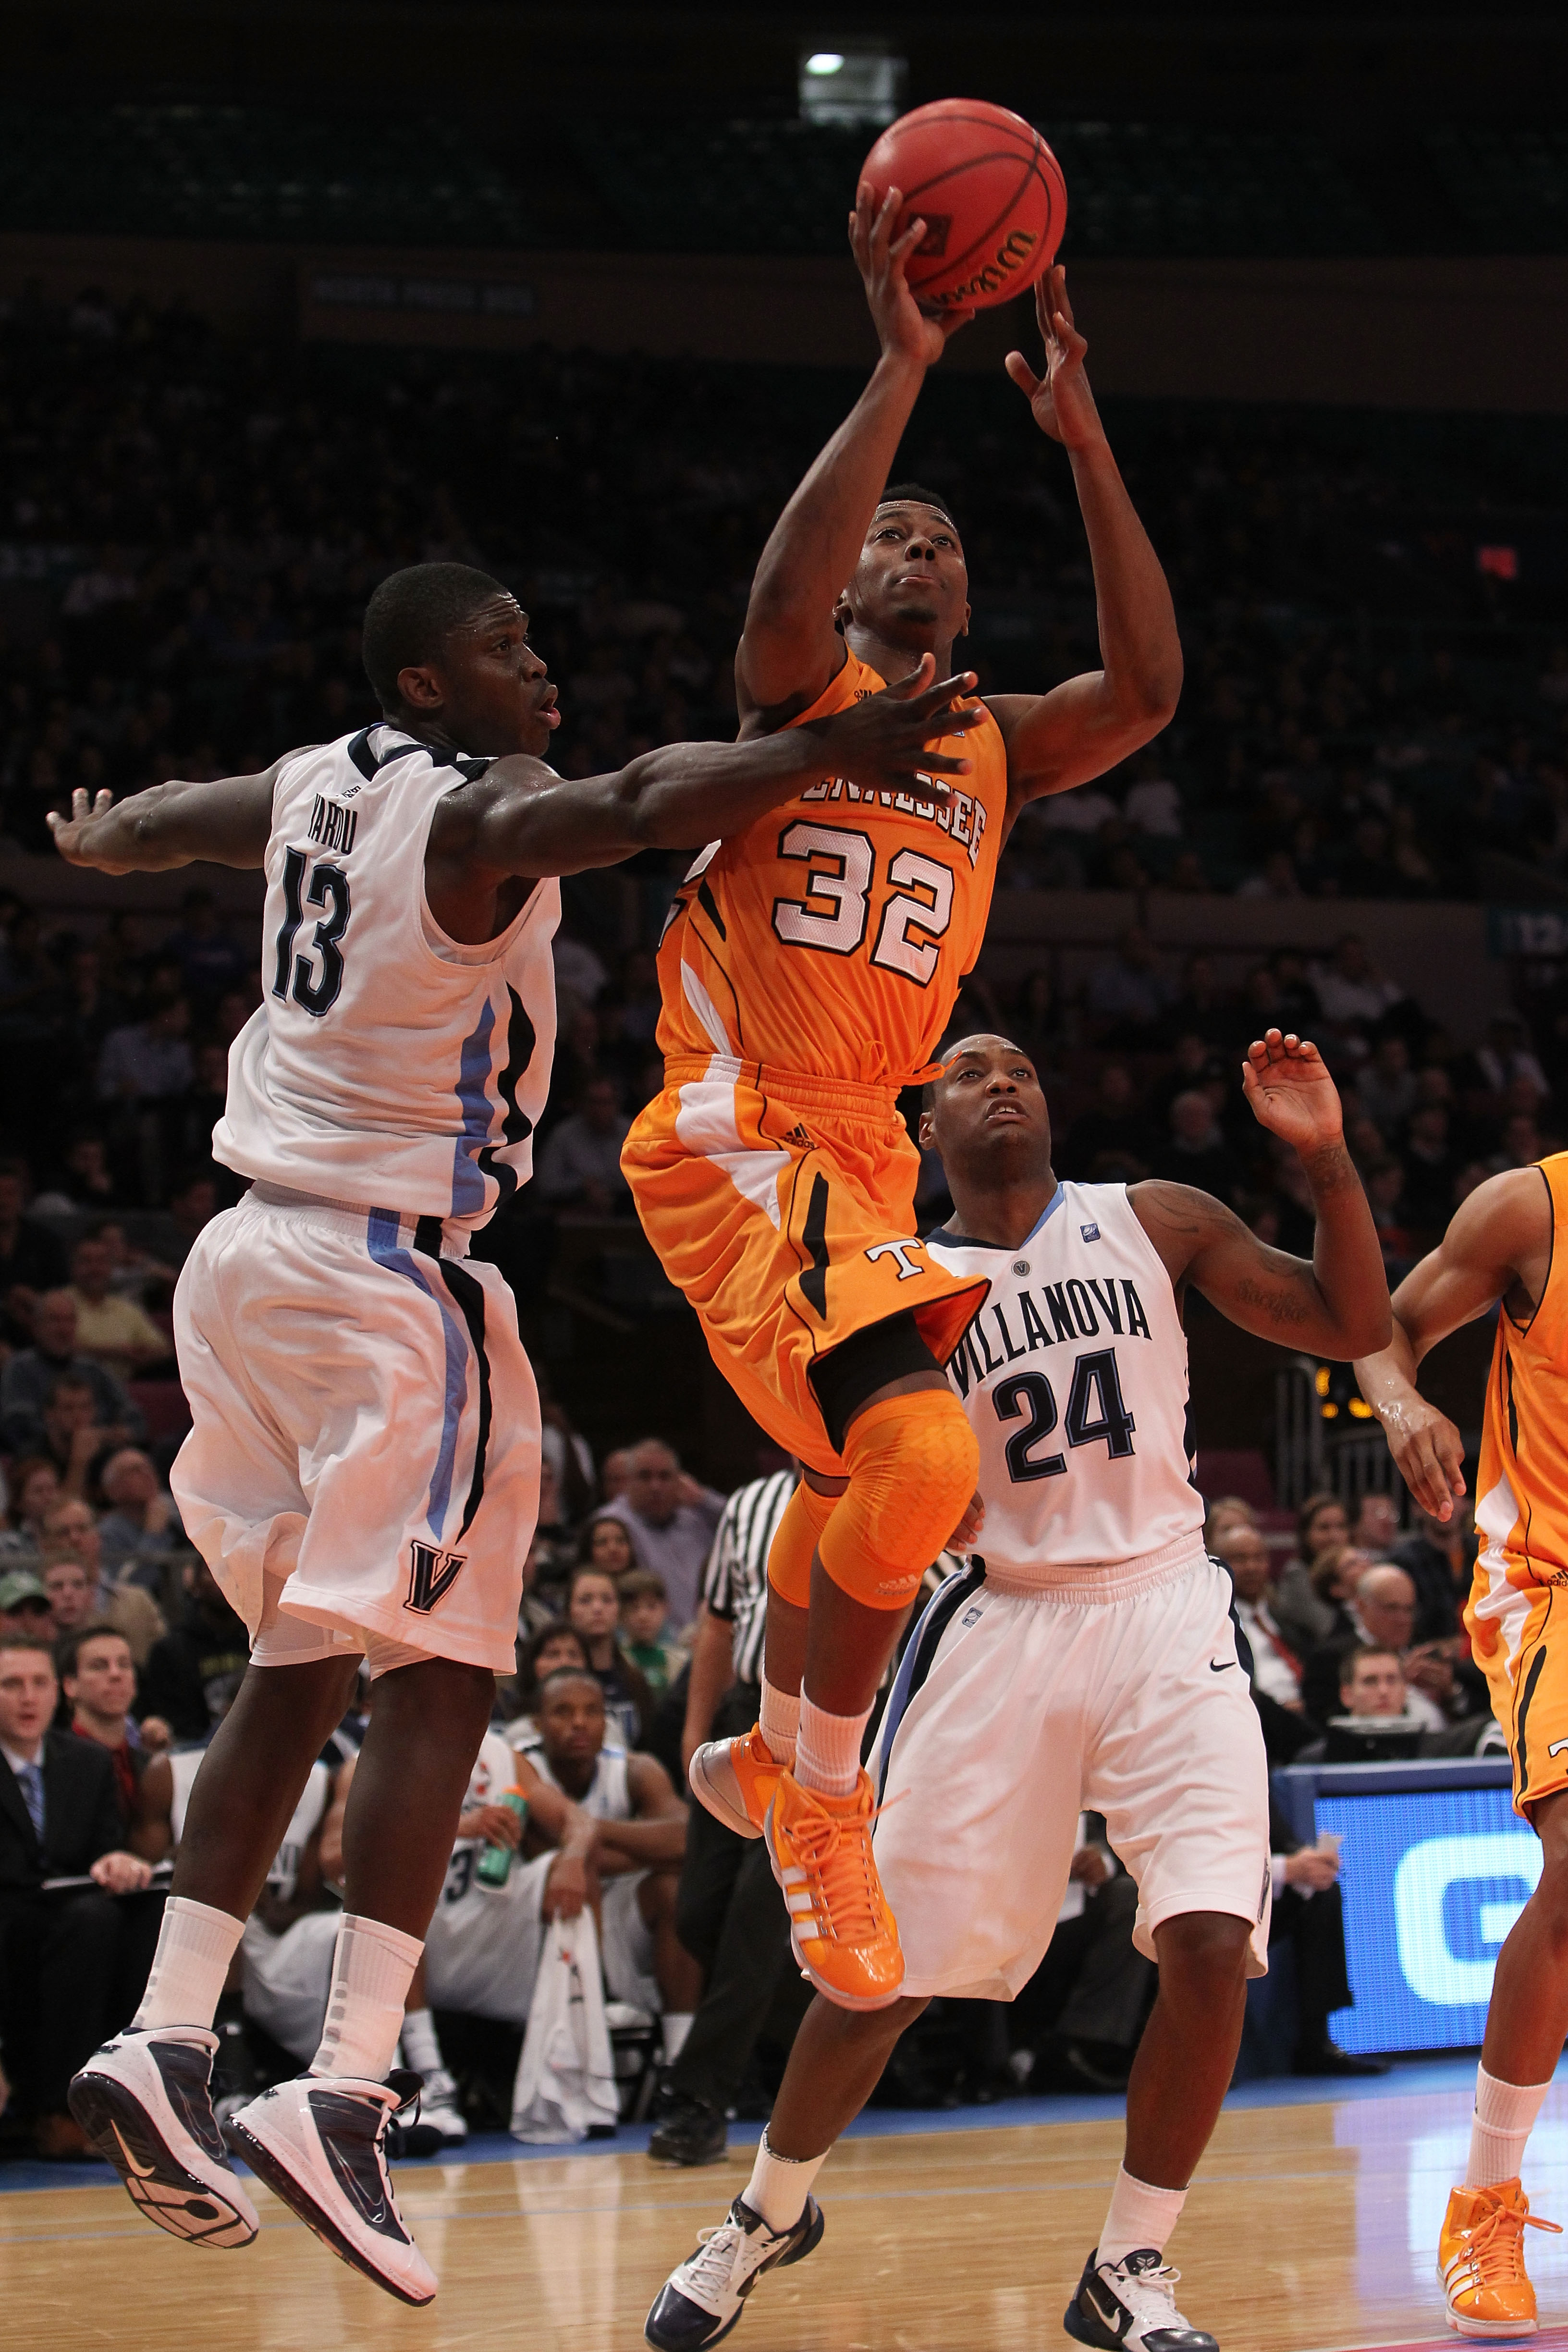 NEW YORK - NOVEMBER 26:  Scotty Hopson #32 of the Tennessee Volunteers shoots the ball despite the block from Mouphtaou Yarou #13 of the Villanova Wildcats  during the Championship game at Madison Square Garden on November 26, 2010 in New York City.  (Pho